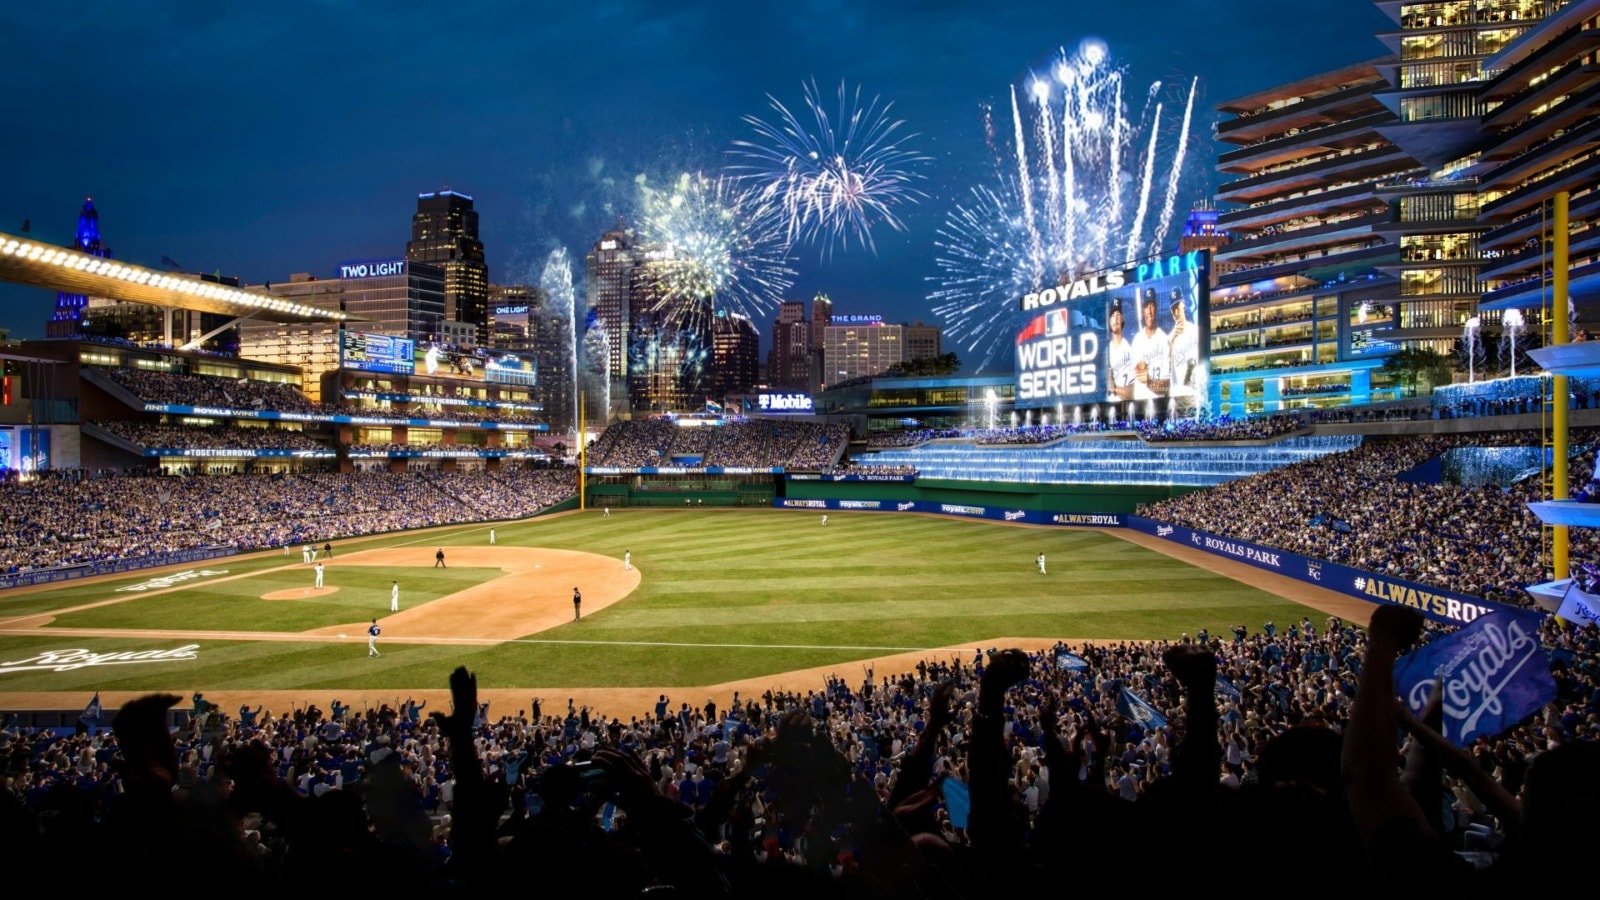 A view of the downtown skyline from inside the proposed Kansas City Royals ballpark.